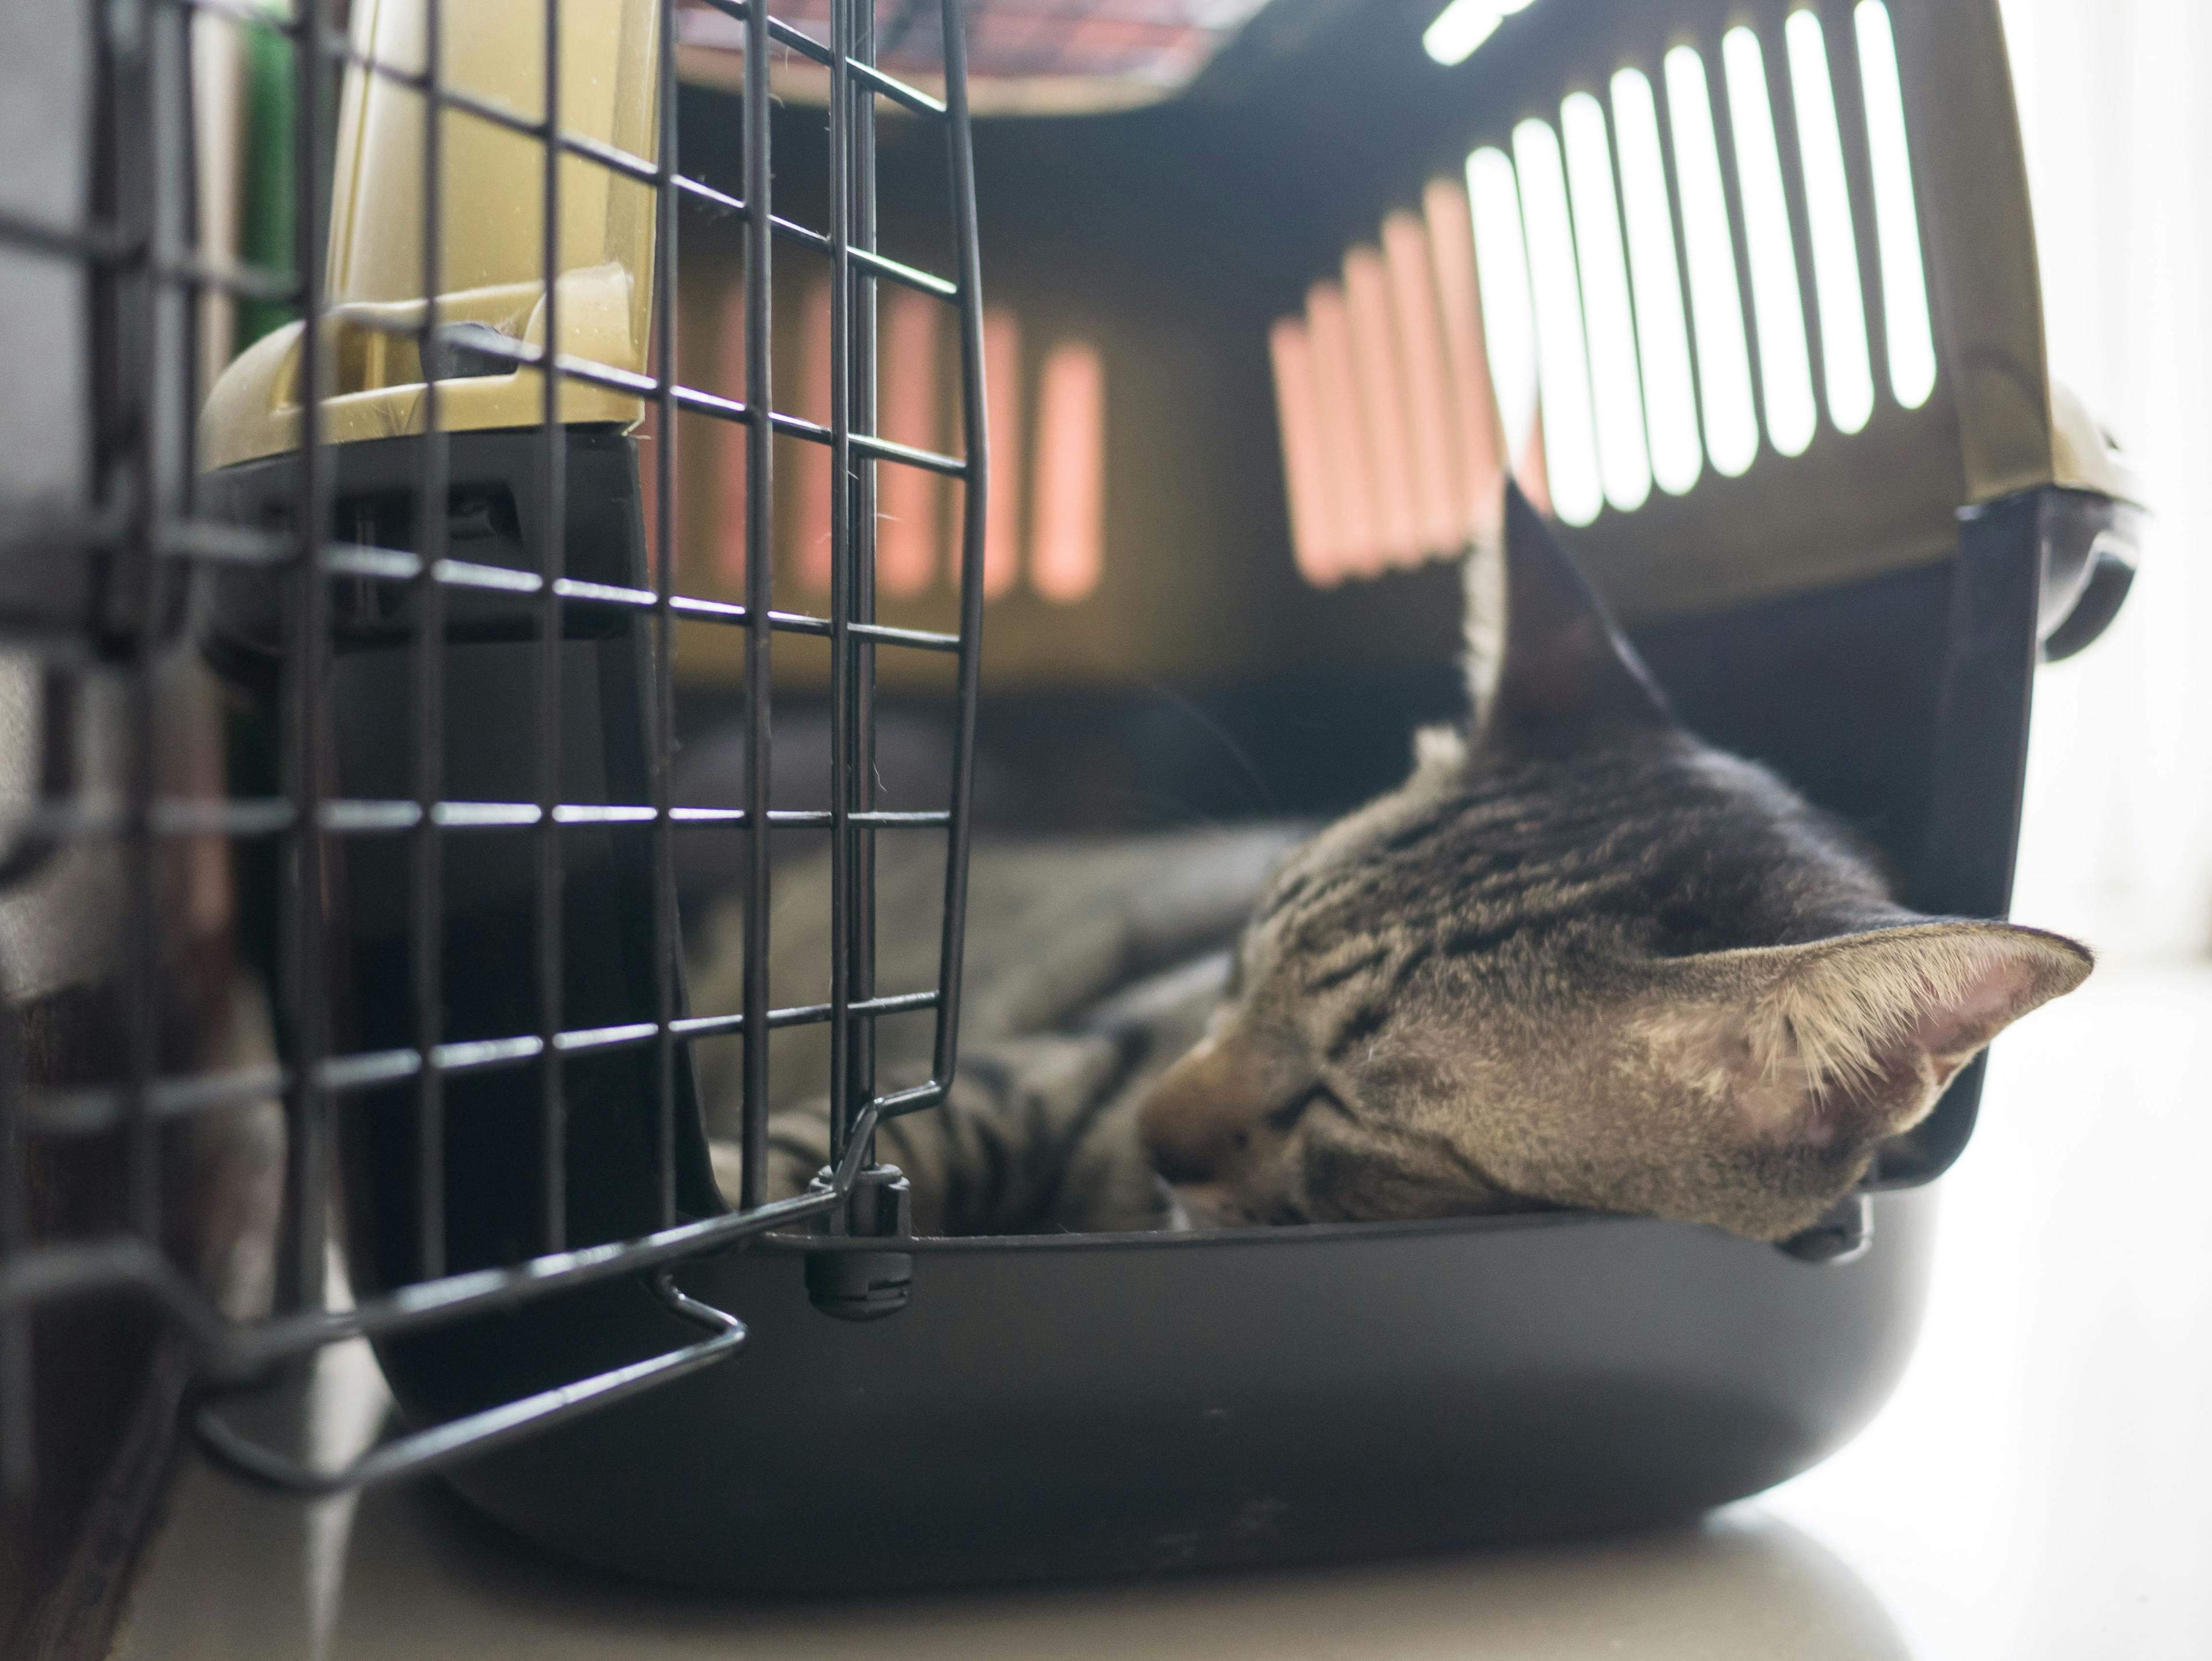 Considerations for the use of sedation for feline veterinary visits